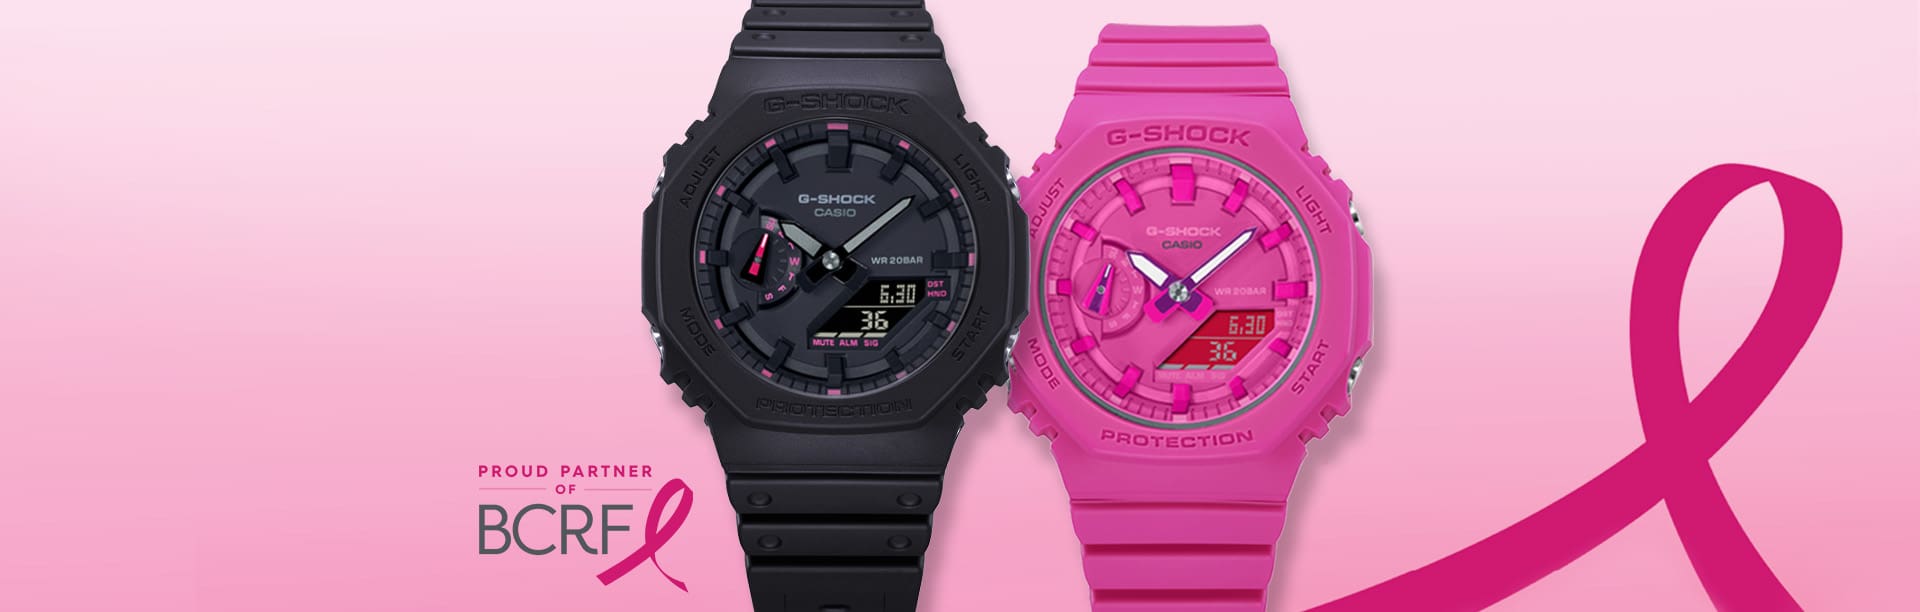 G-SHOCK X Breast Cancer Research Foundation models